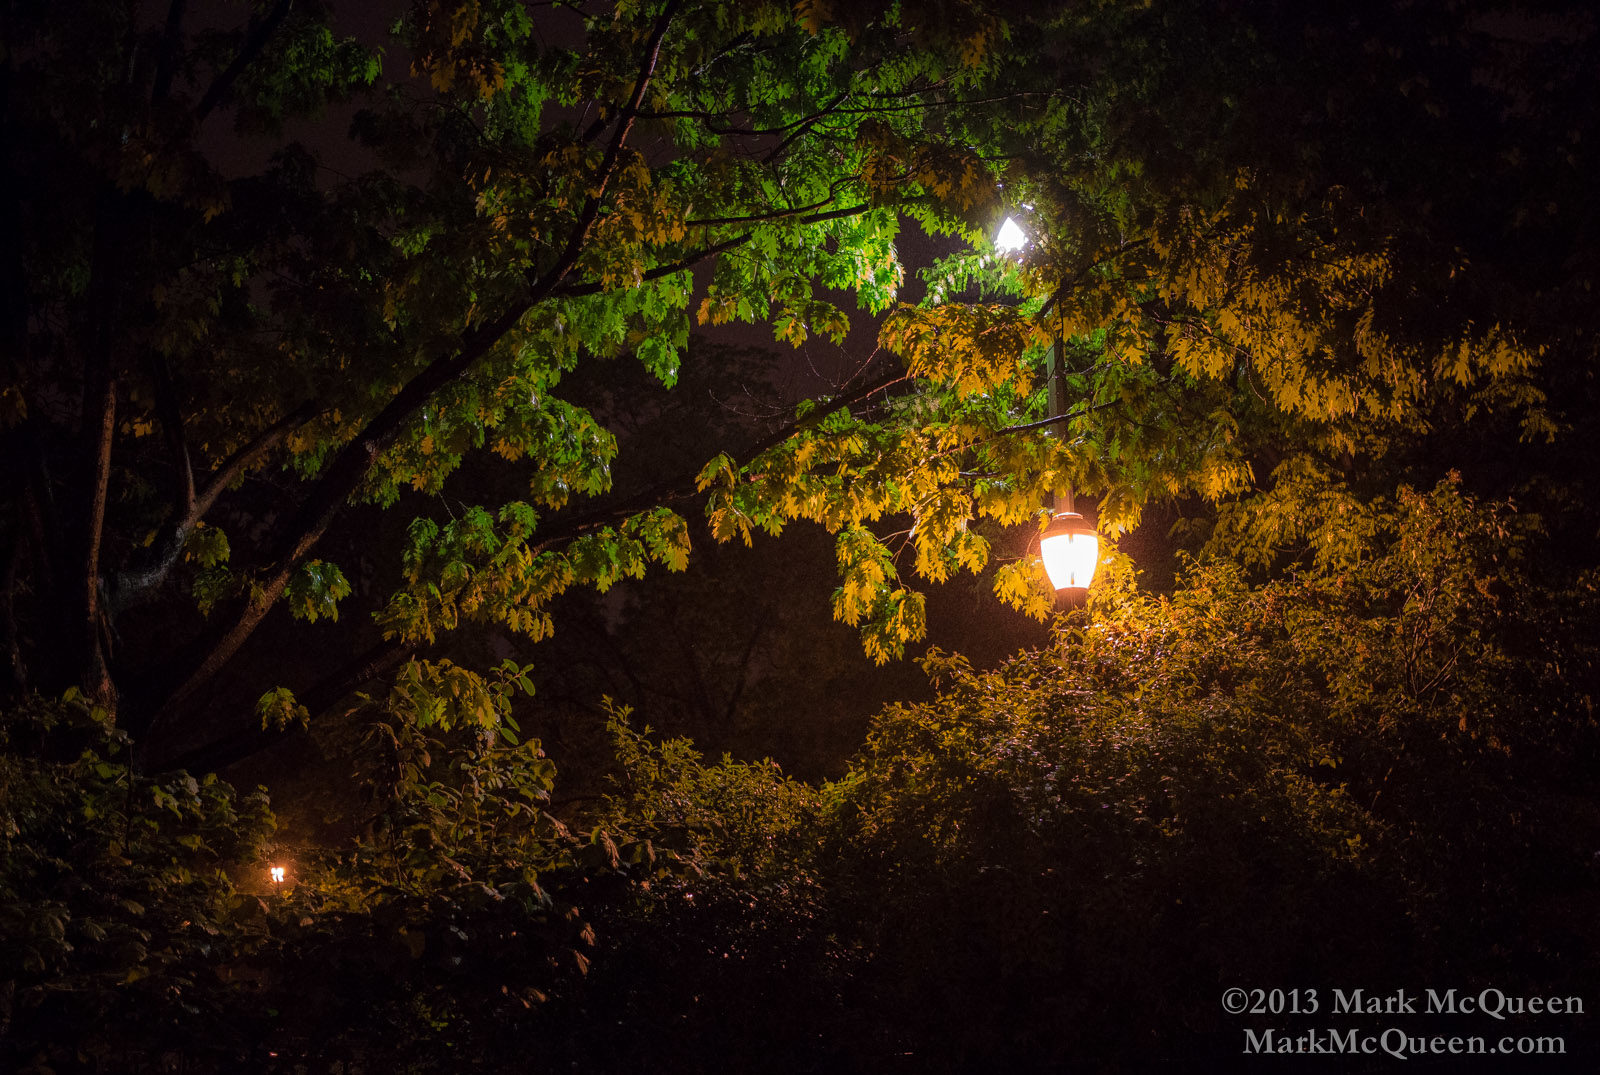 Tomkins Square Park: New York City Street Photography, nighttime in NYC